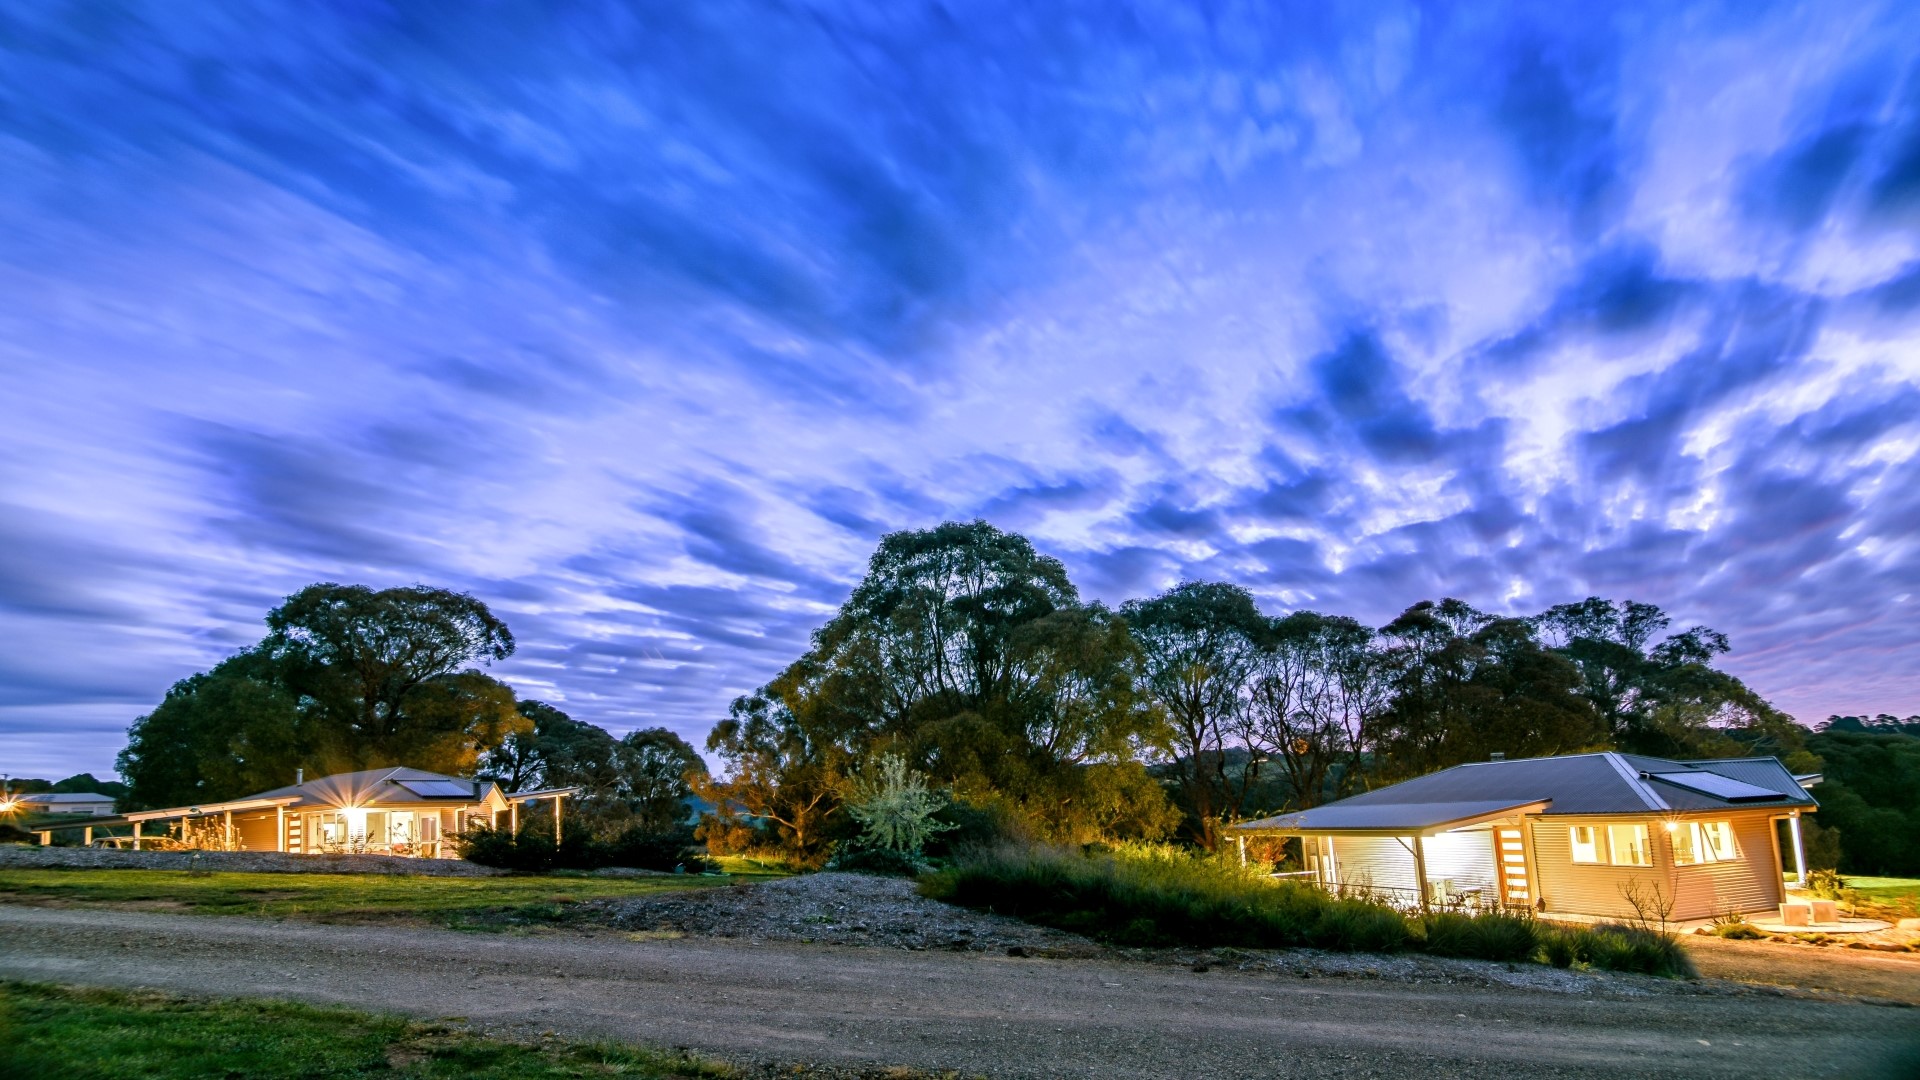 Rural views from outdoor dining area in the best luxury accommodation in Orange NSW